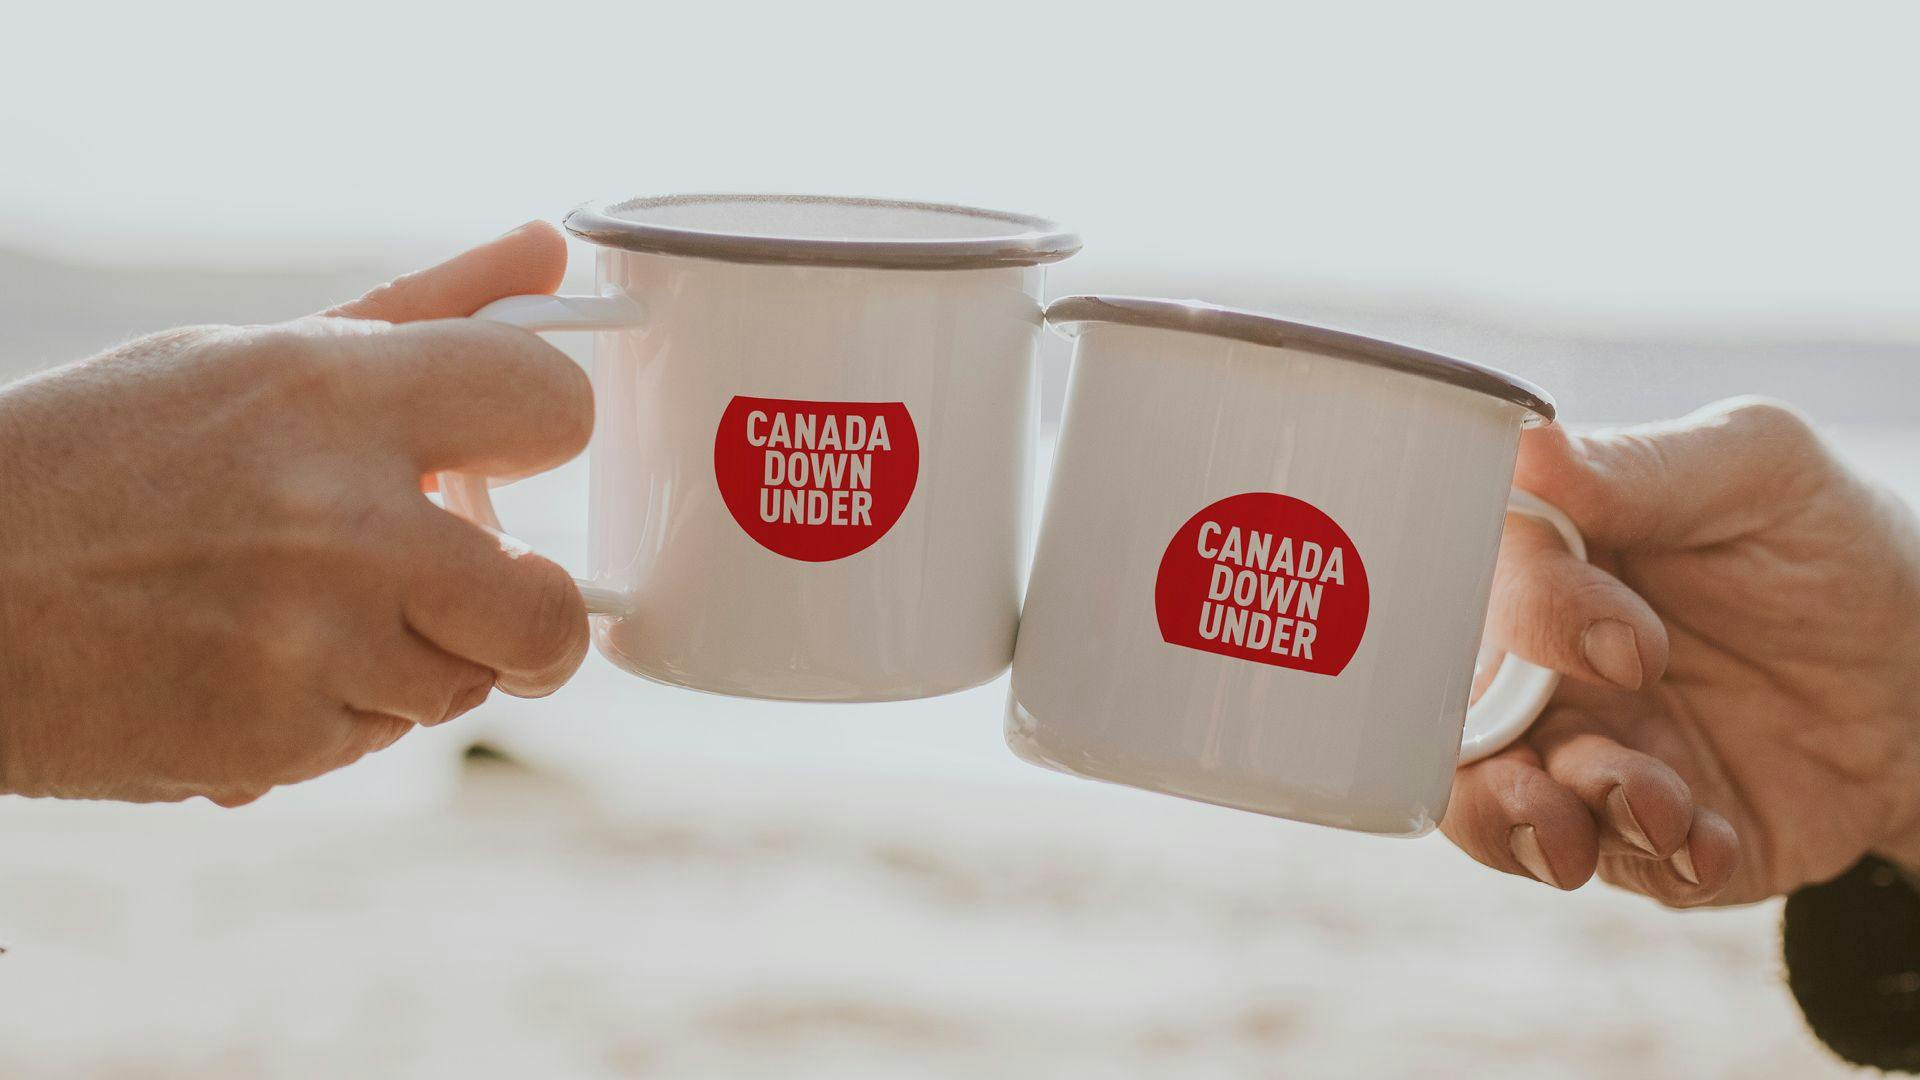 Two mugs with the Canada Down Under brand